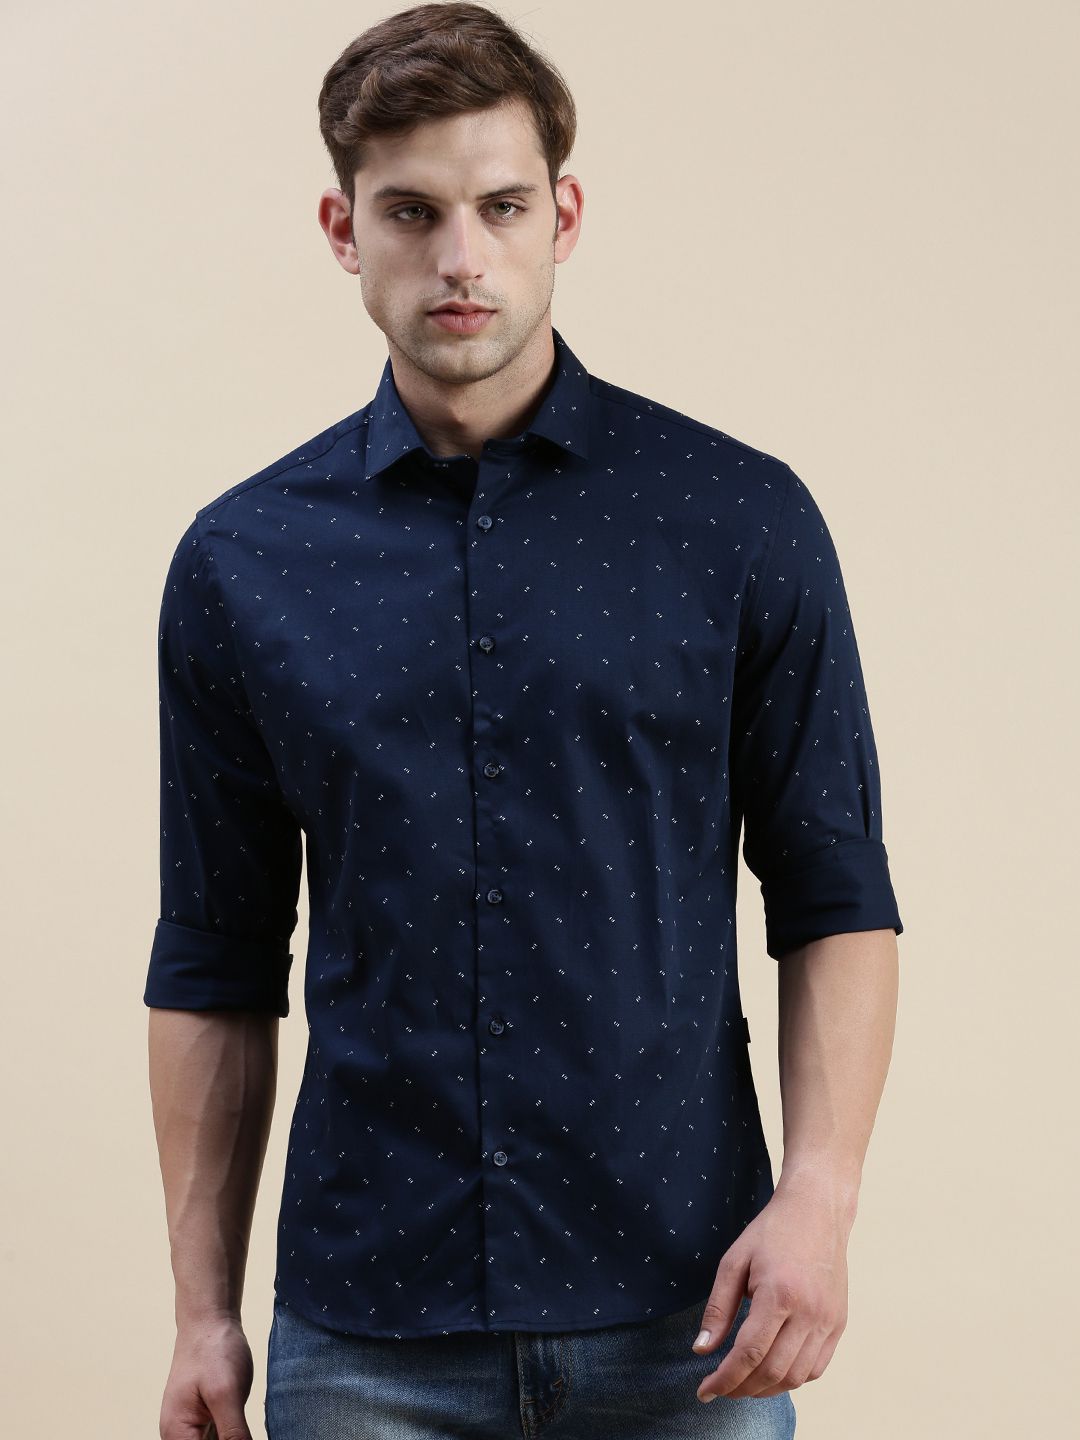     			Showoff Cotton Blend Regular Fit Printed Full Sleeves Men's Casual Shirt - Navy Blue ( Pack of 1 )